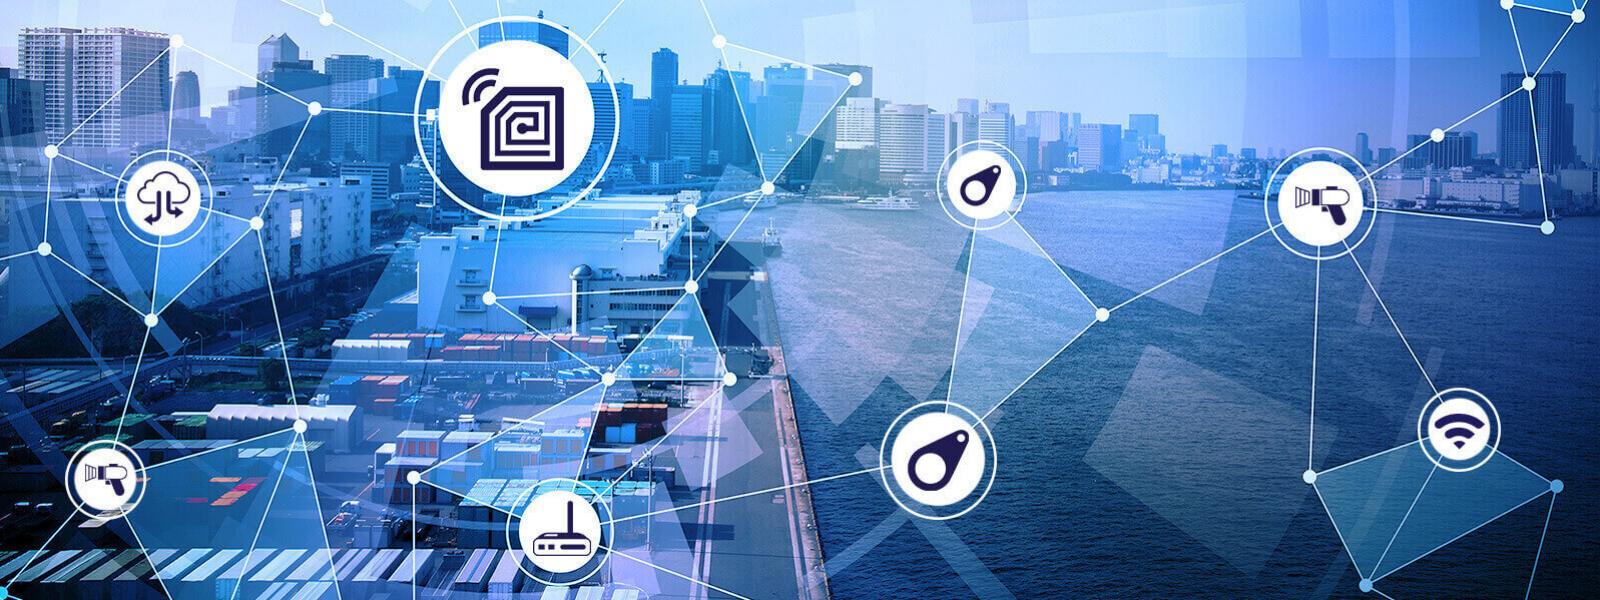 W&O Supply launches digital RFID valve management service for ships